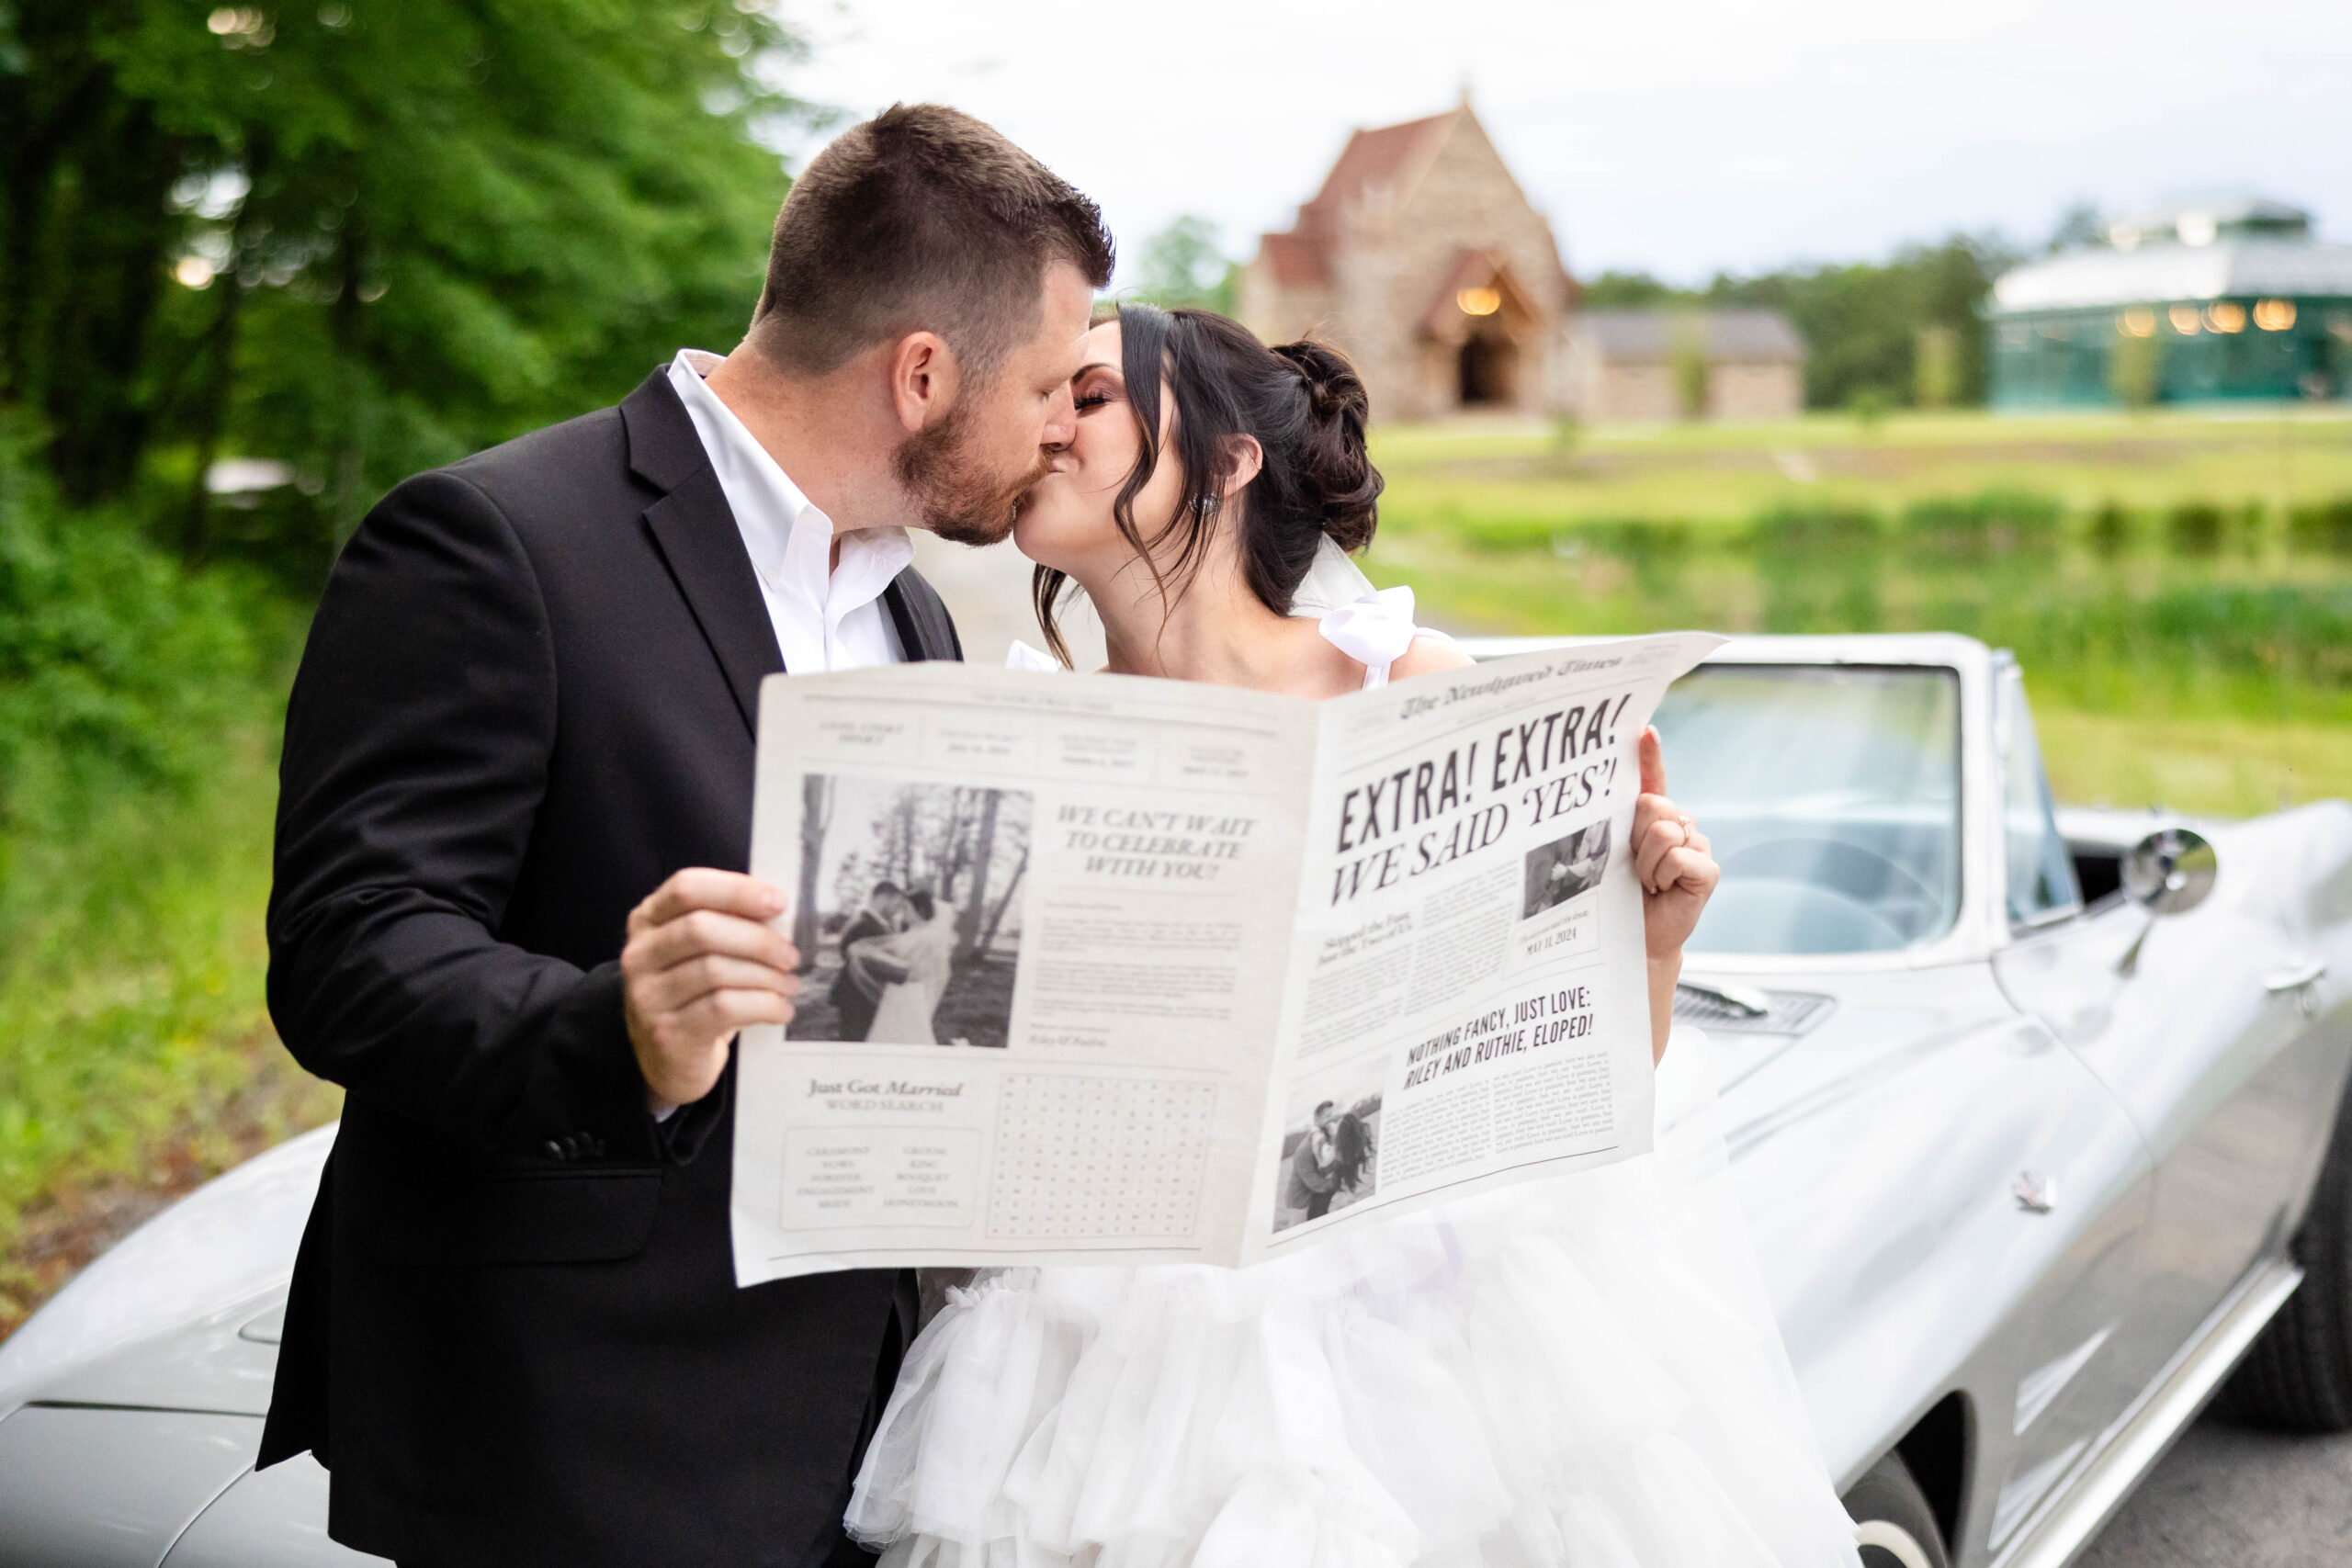 Bride and Groom with their classic convertible car. Bride dressed in a poufy short white wedding dress with ribbon shoulder ties. Groom in a black tuxedo. Bride and Groom are leaning on the front of the car and kissing. Bride and Groom are holding a newspaper with them as the headlines about just getting married.